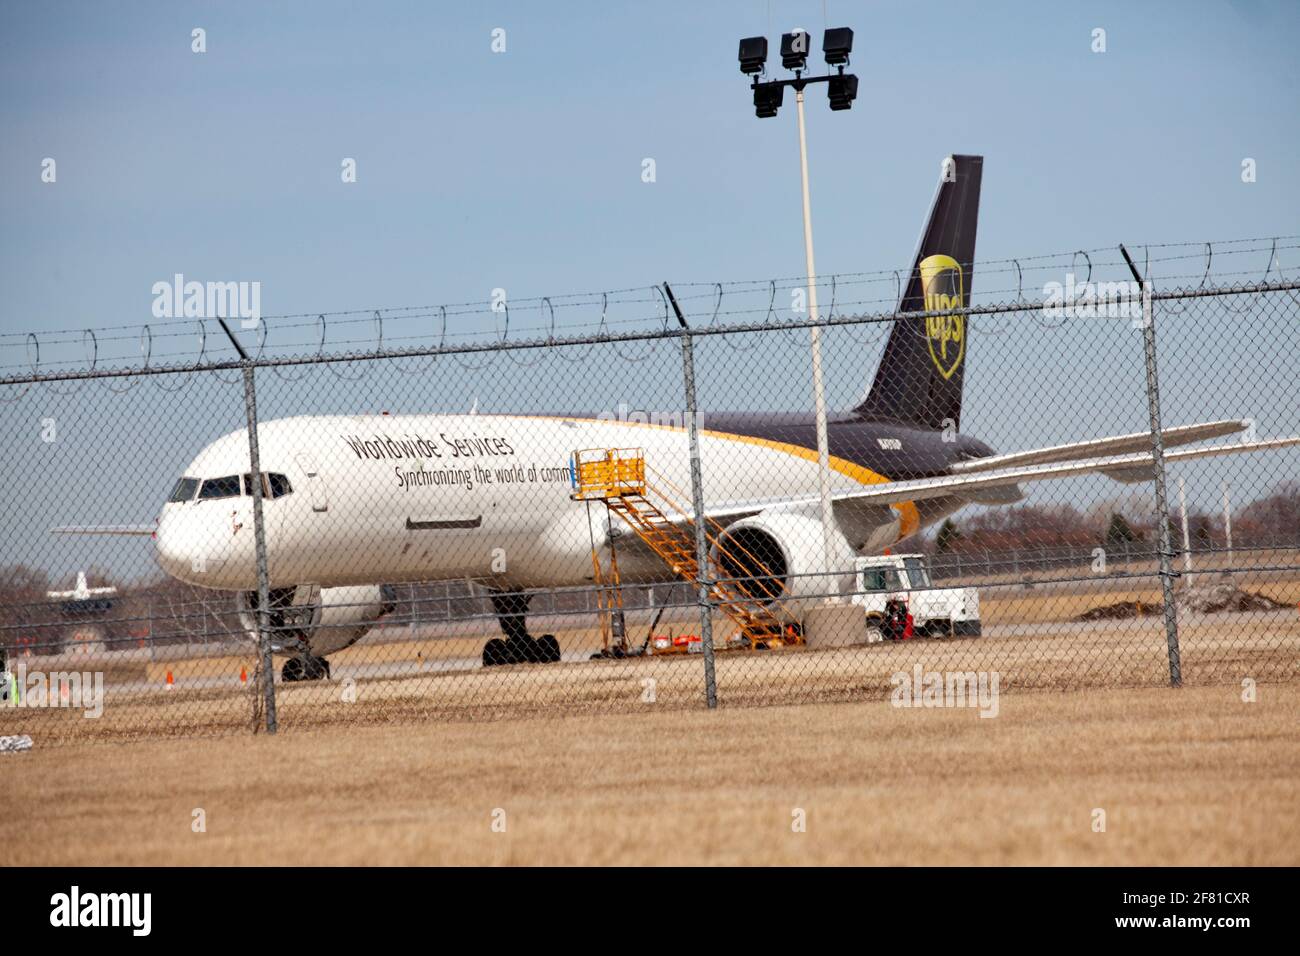 UPS Airplane parked at Minneapolis St Paul International Airport behind chain linked fence topped with concertina wire.  Minneapolis Minnesota MN USA Stock Photo